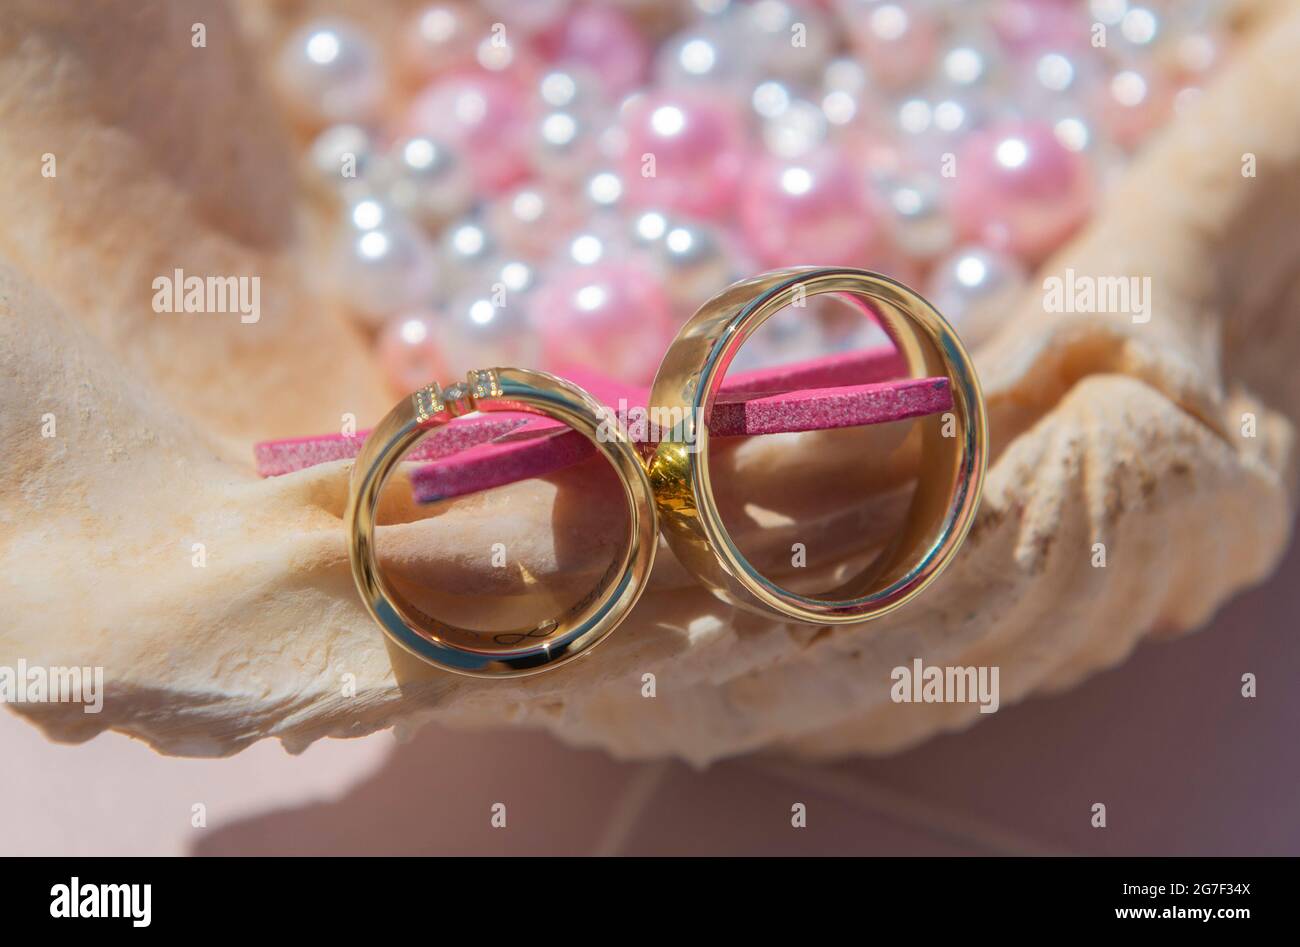 Pair of gold wedding ring bands jewelry on seashell with pink and white pearl beads Stock Photo